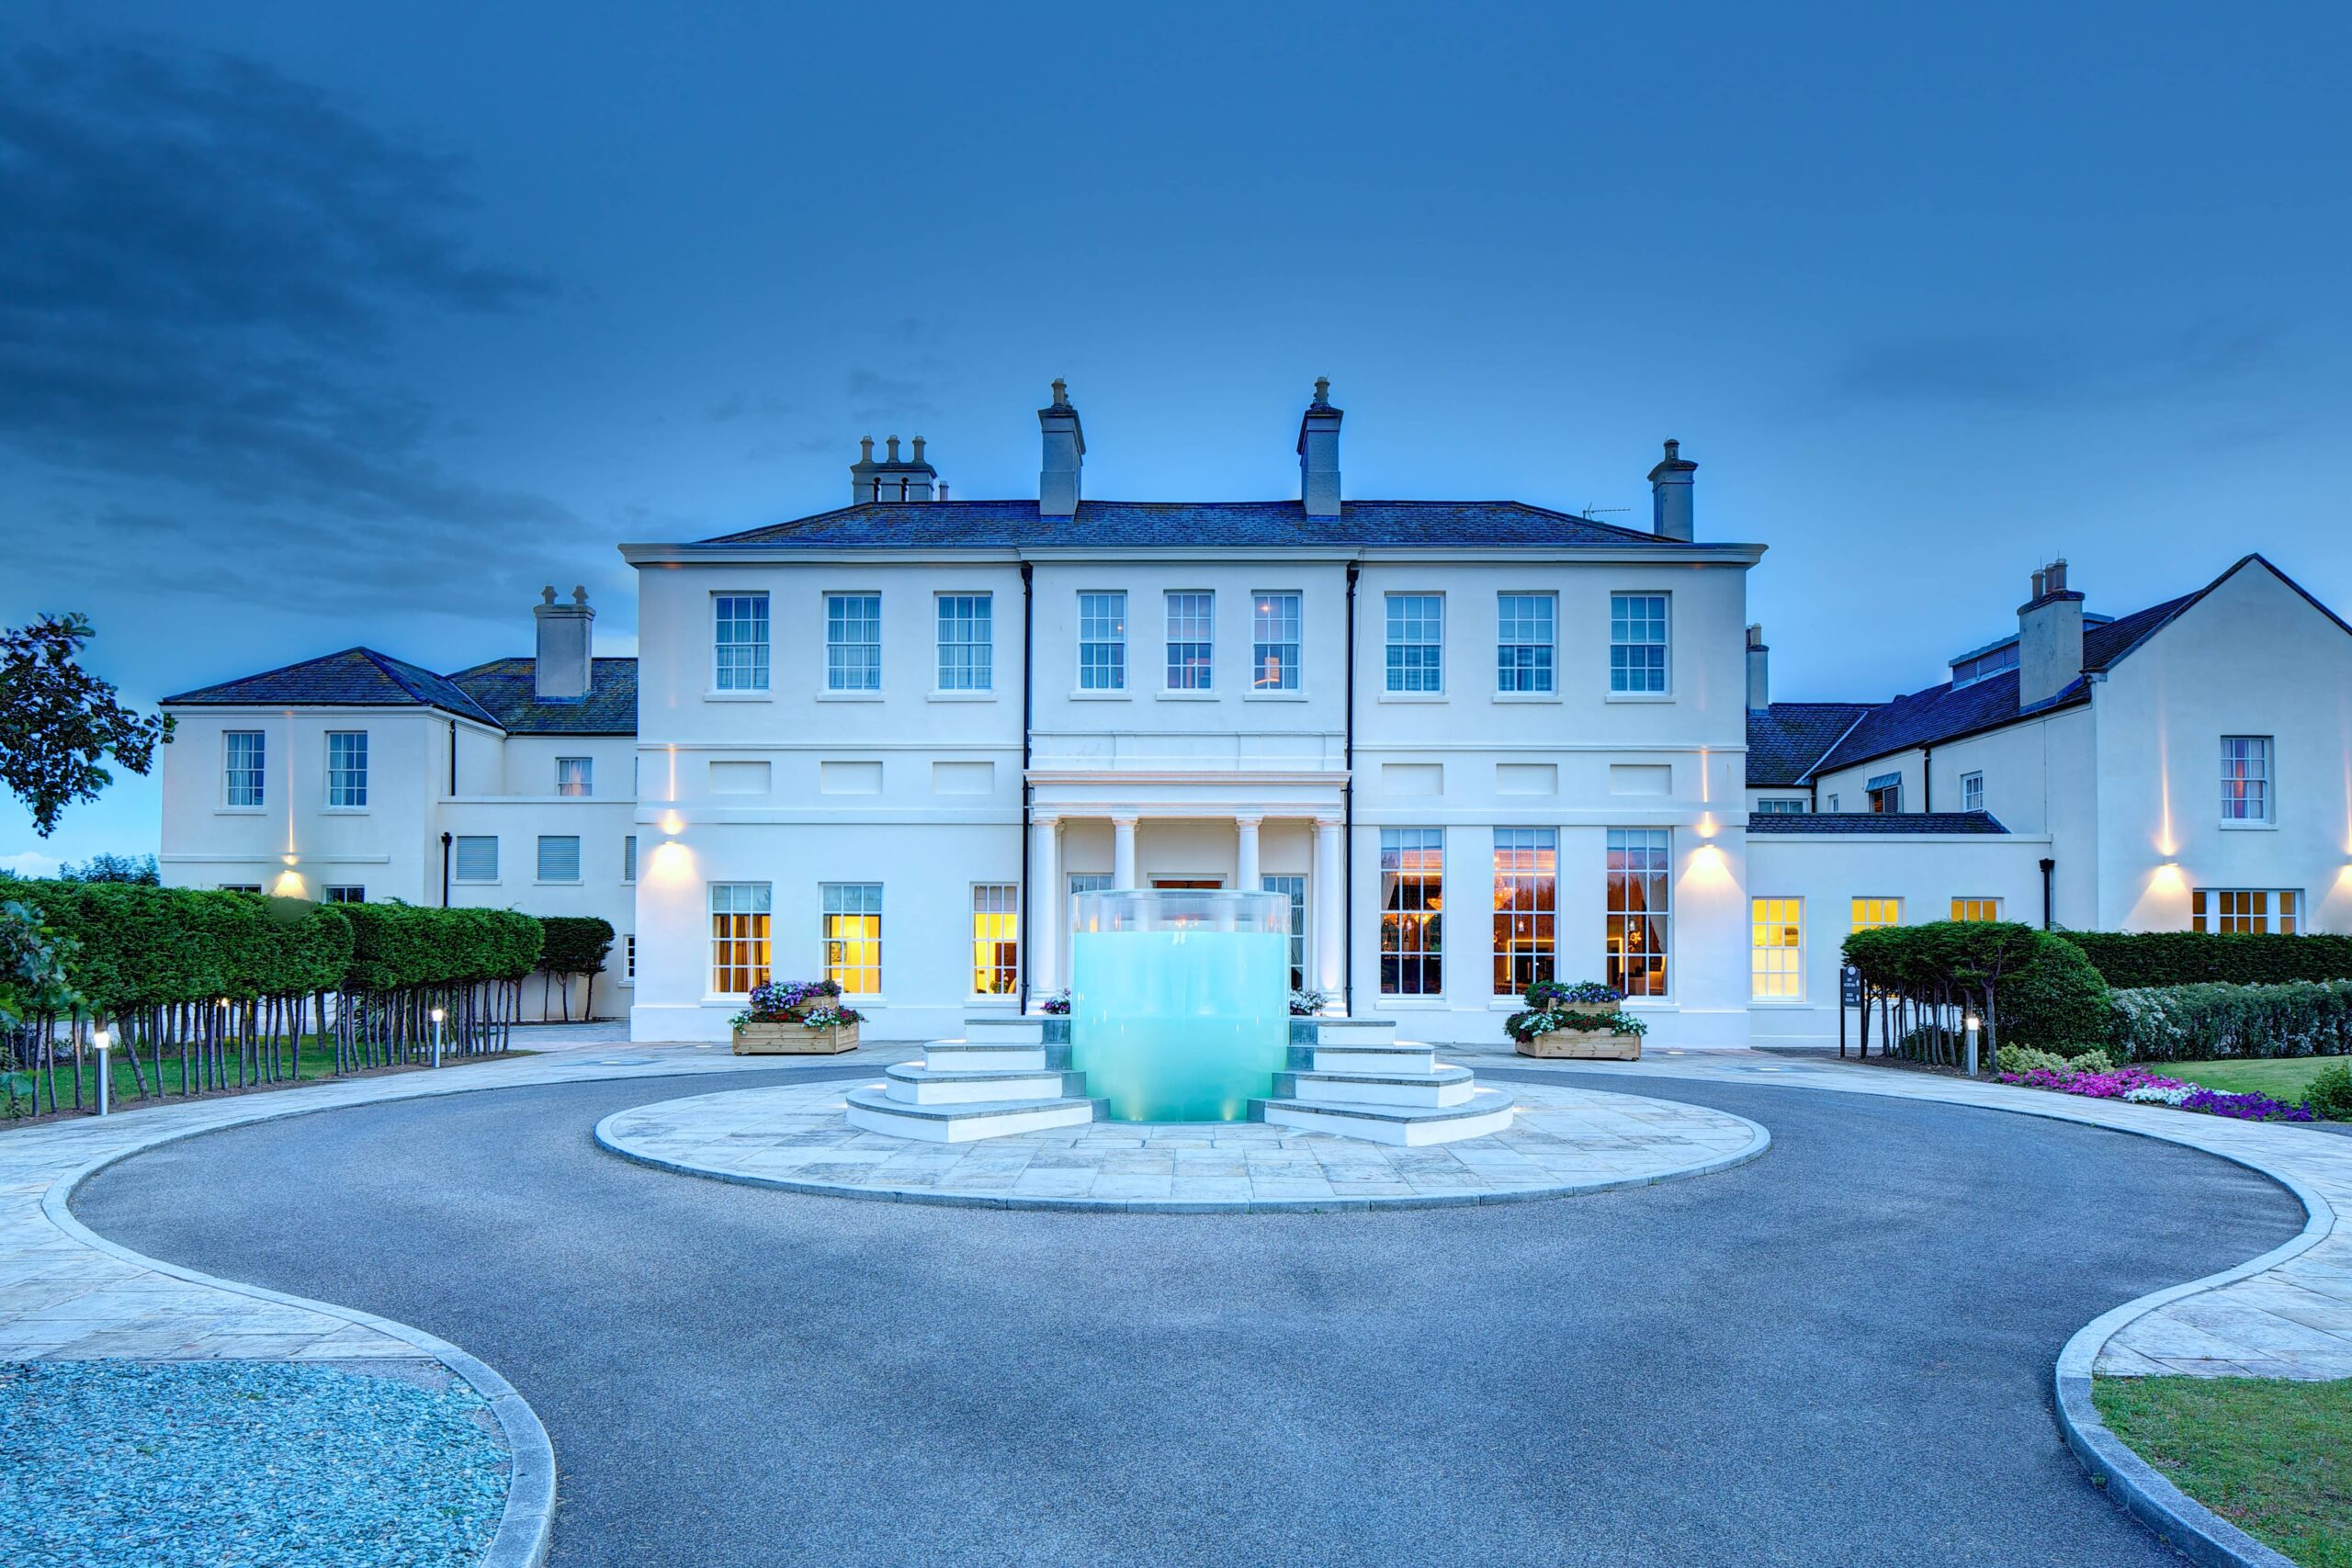 Freeze the fear with seaham hall’s xhayle wellness partnership